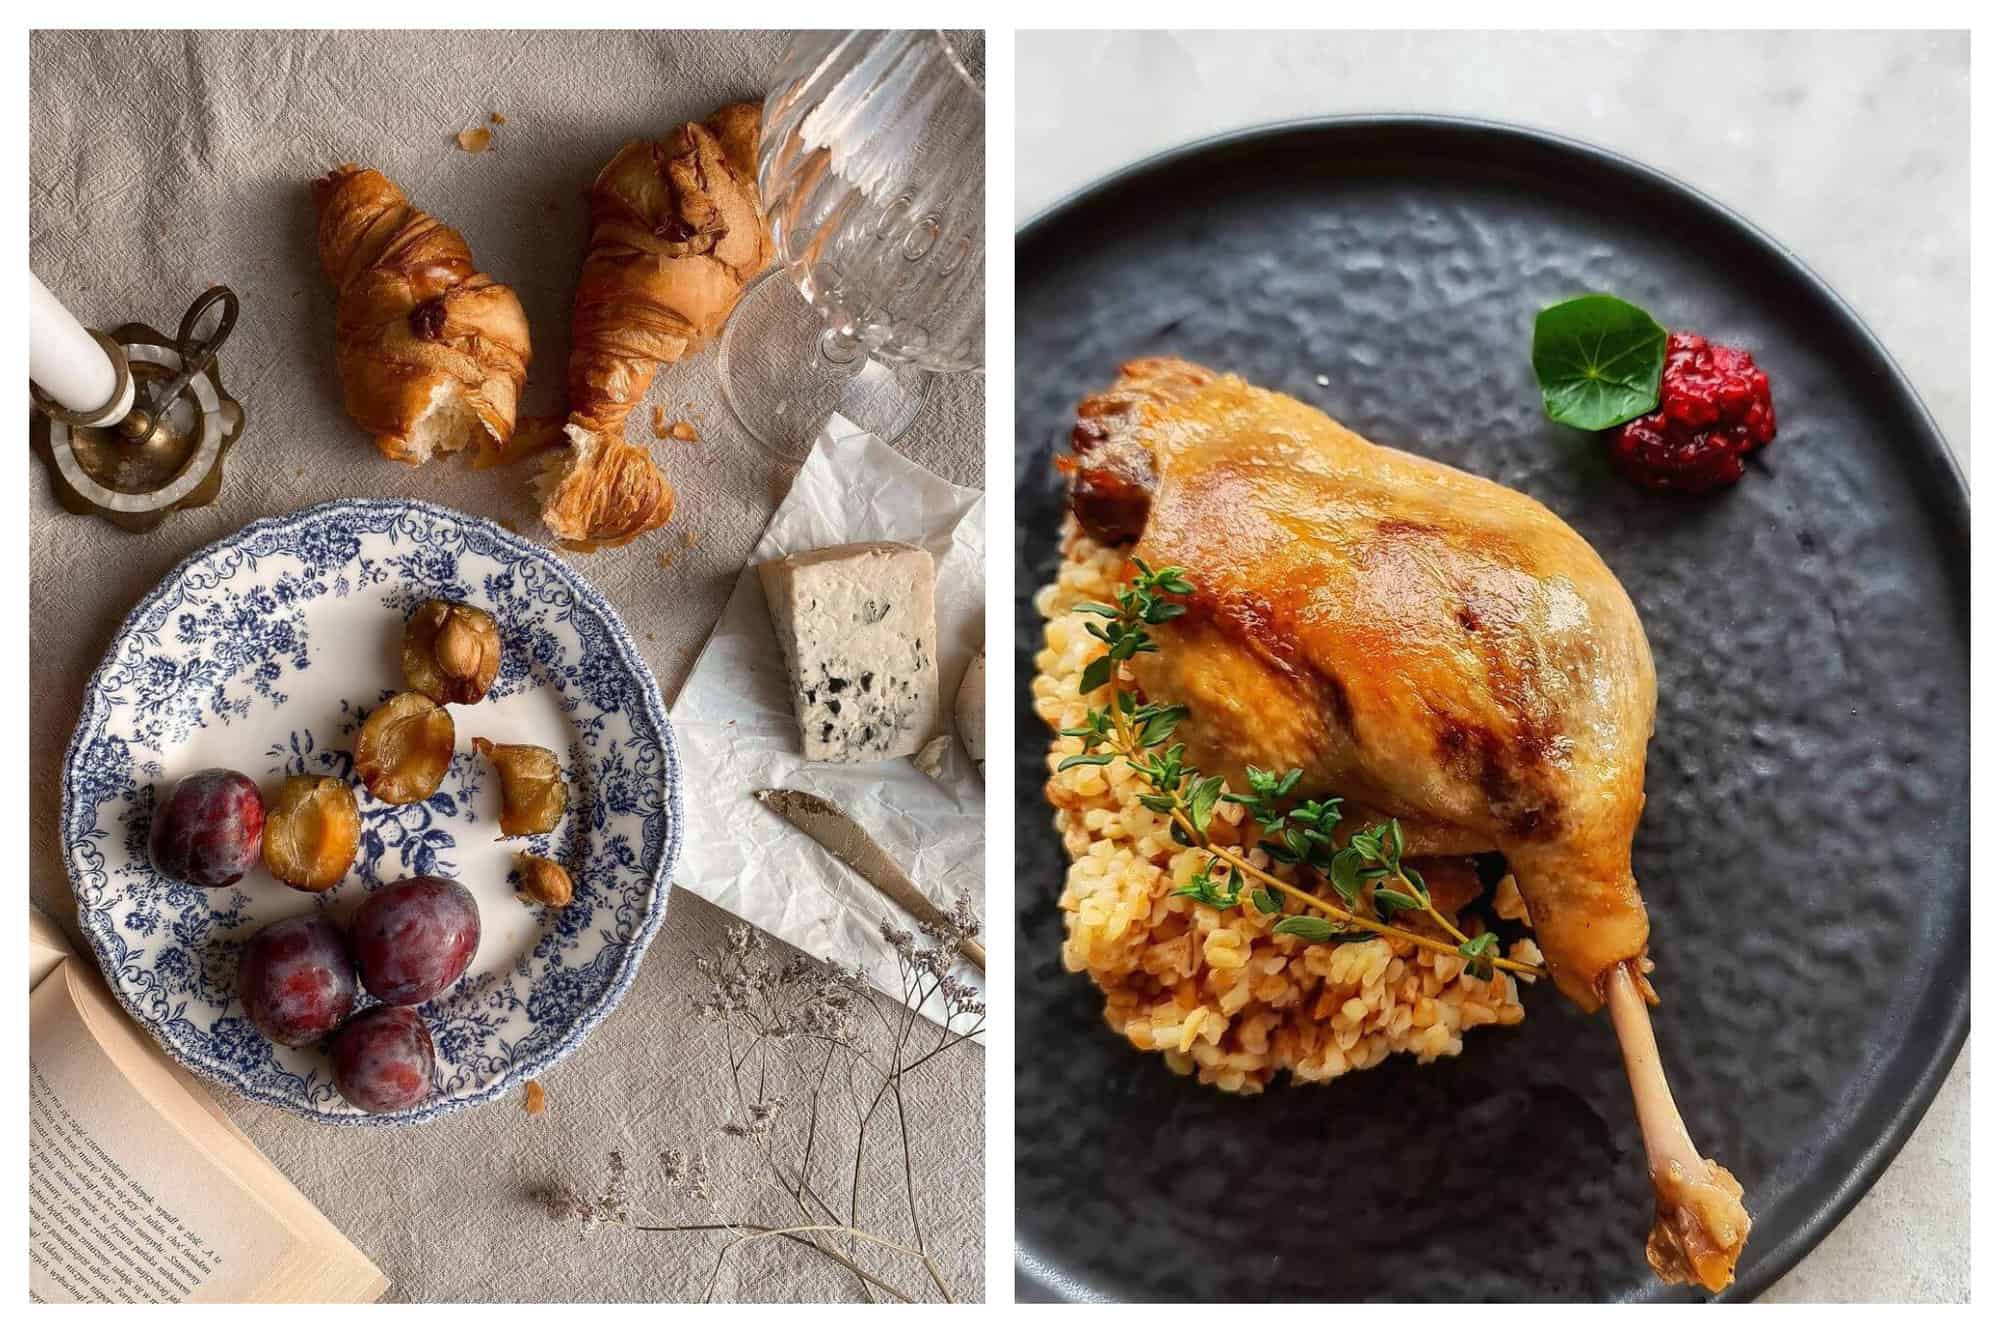 Left: A picture of a table setting with croissants, plums in a vintage plate, cheese, a glass, a white candle, a book, and some flowers. Right: A famous French dish called Confit de Canard or Duck Confit is pictured in a slate black plate, garnished with risotto, thyme, and cranberry.